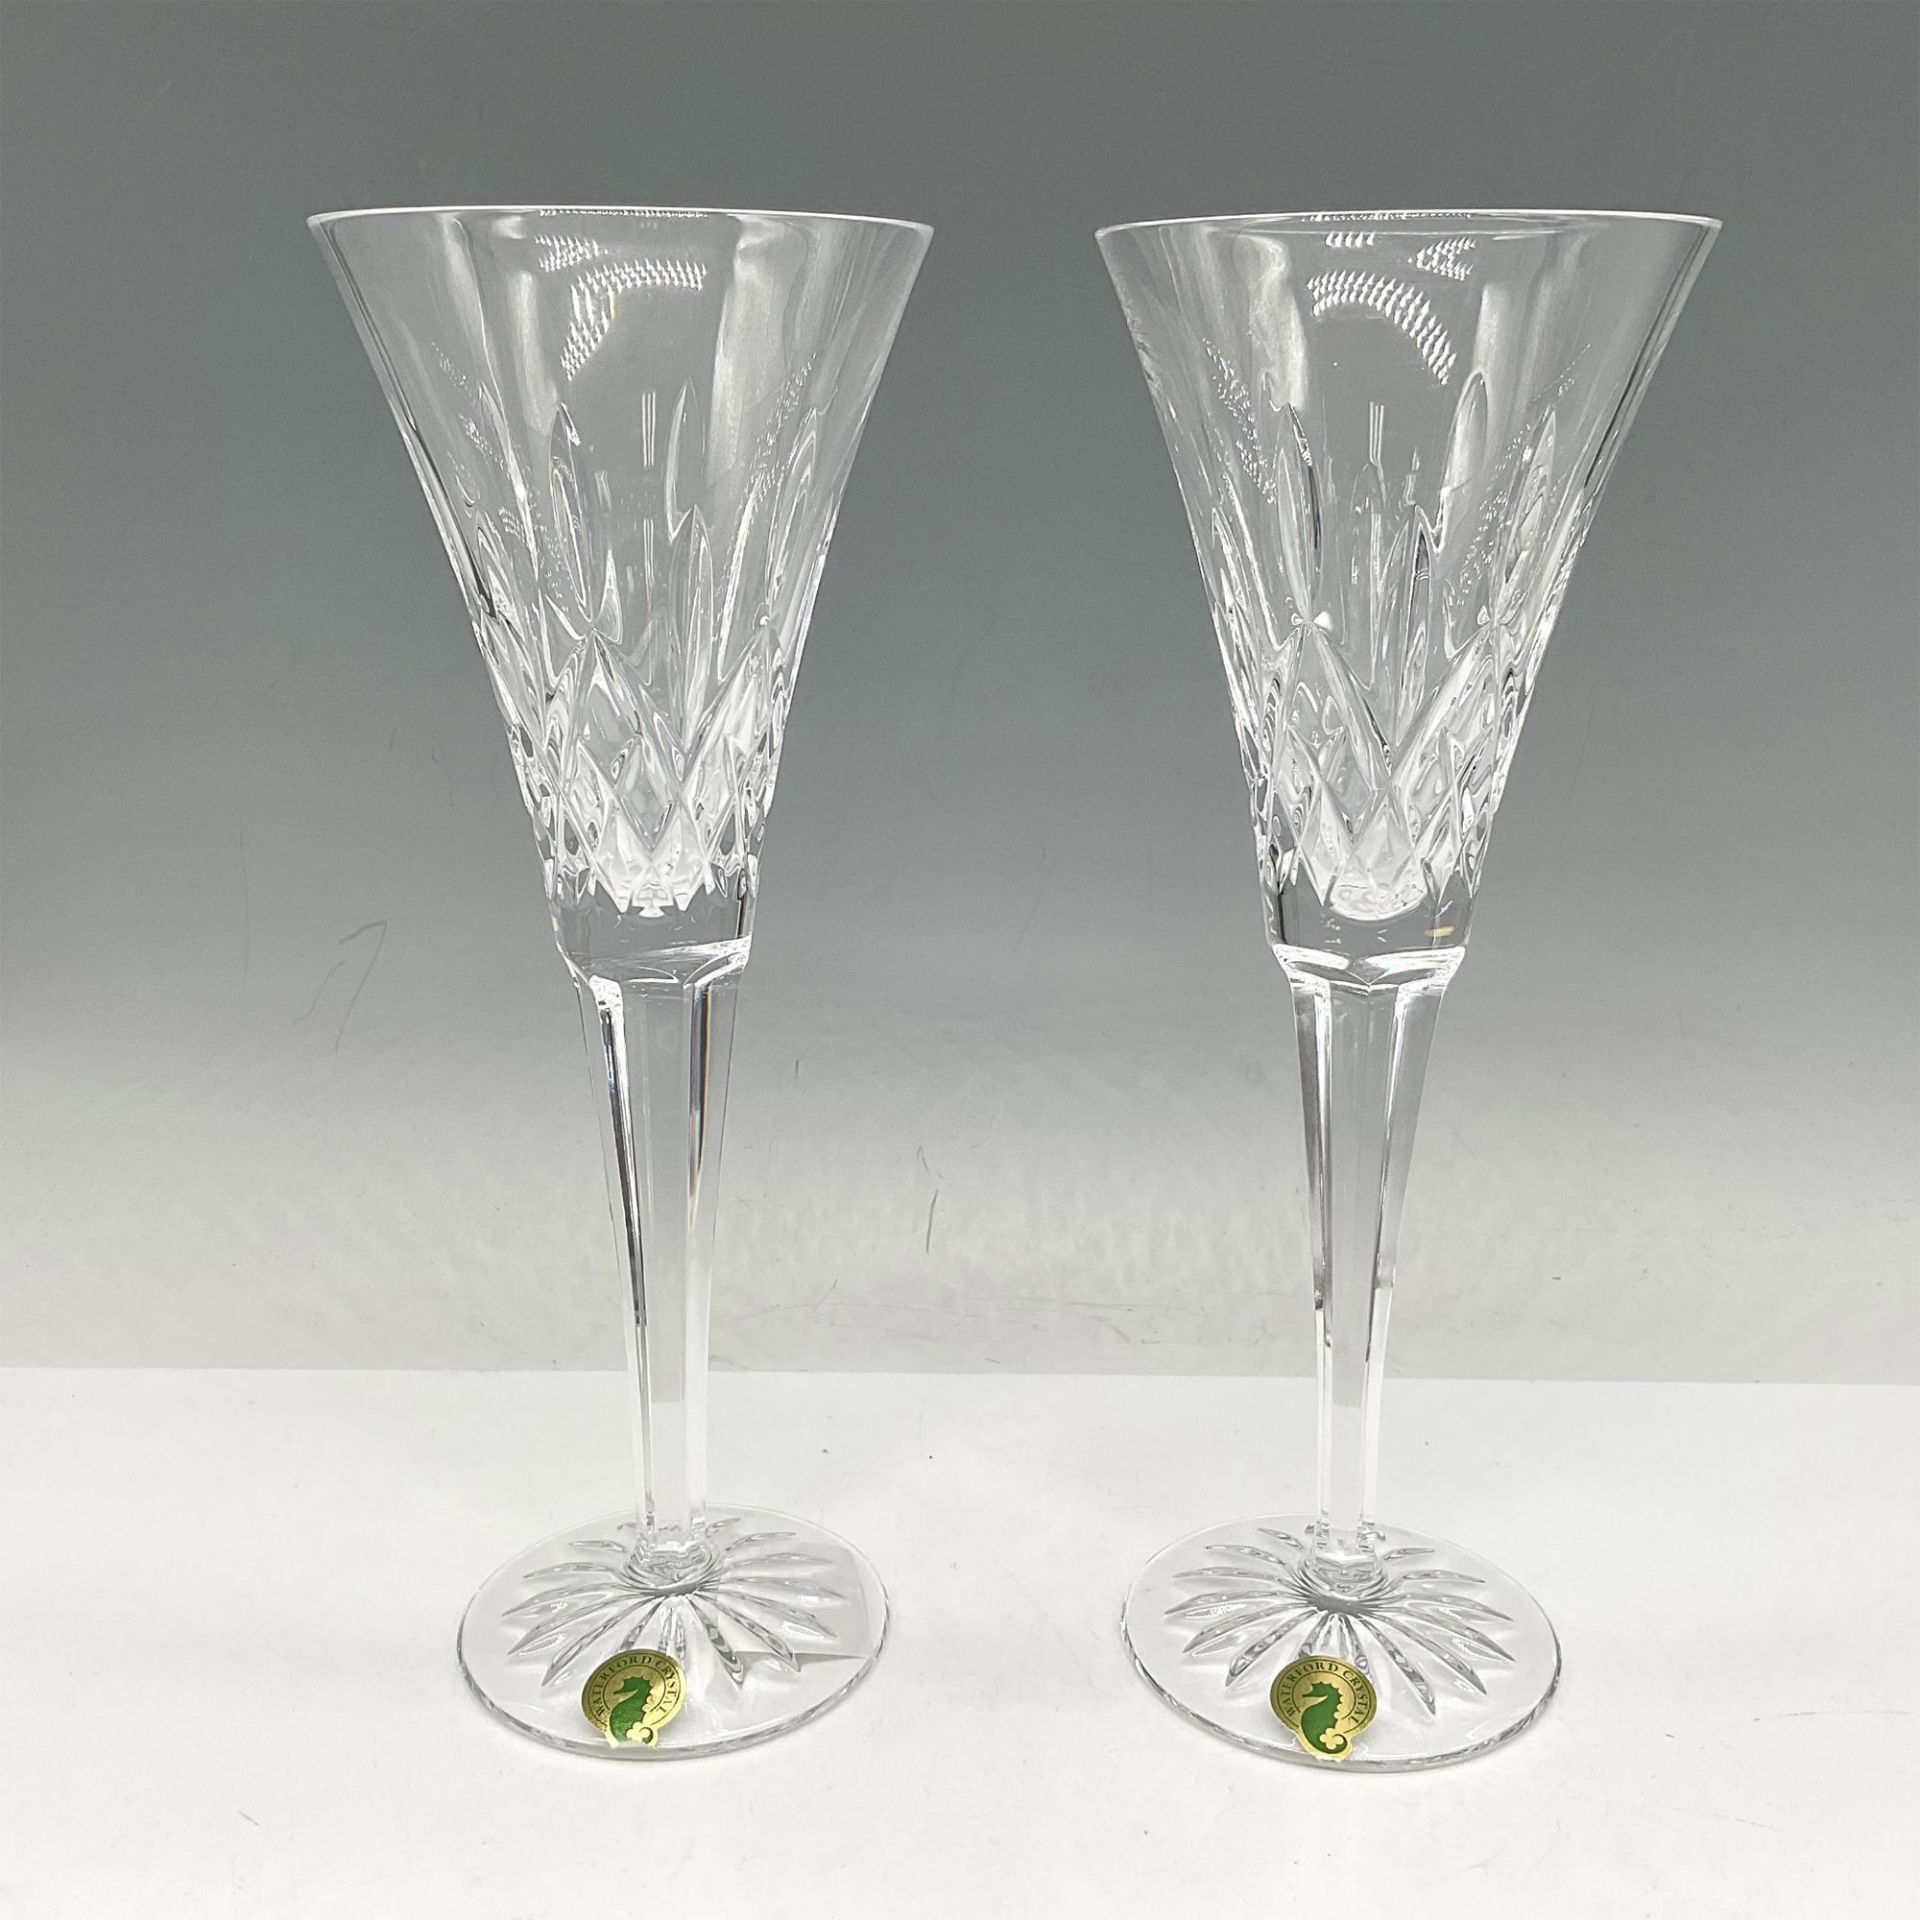 Pair of Waterford Crystal Toasting Flutes, Lismore